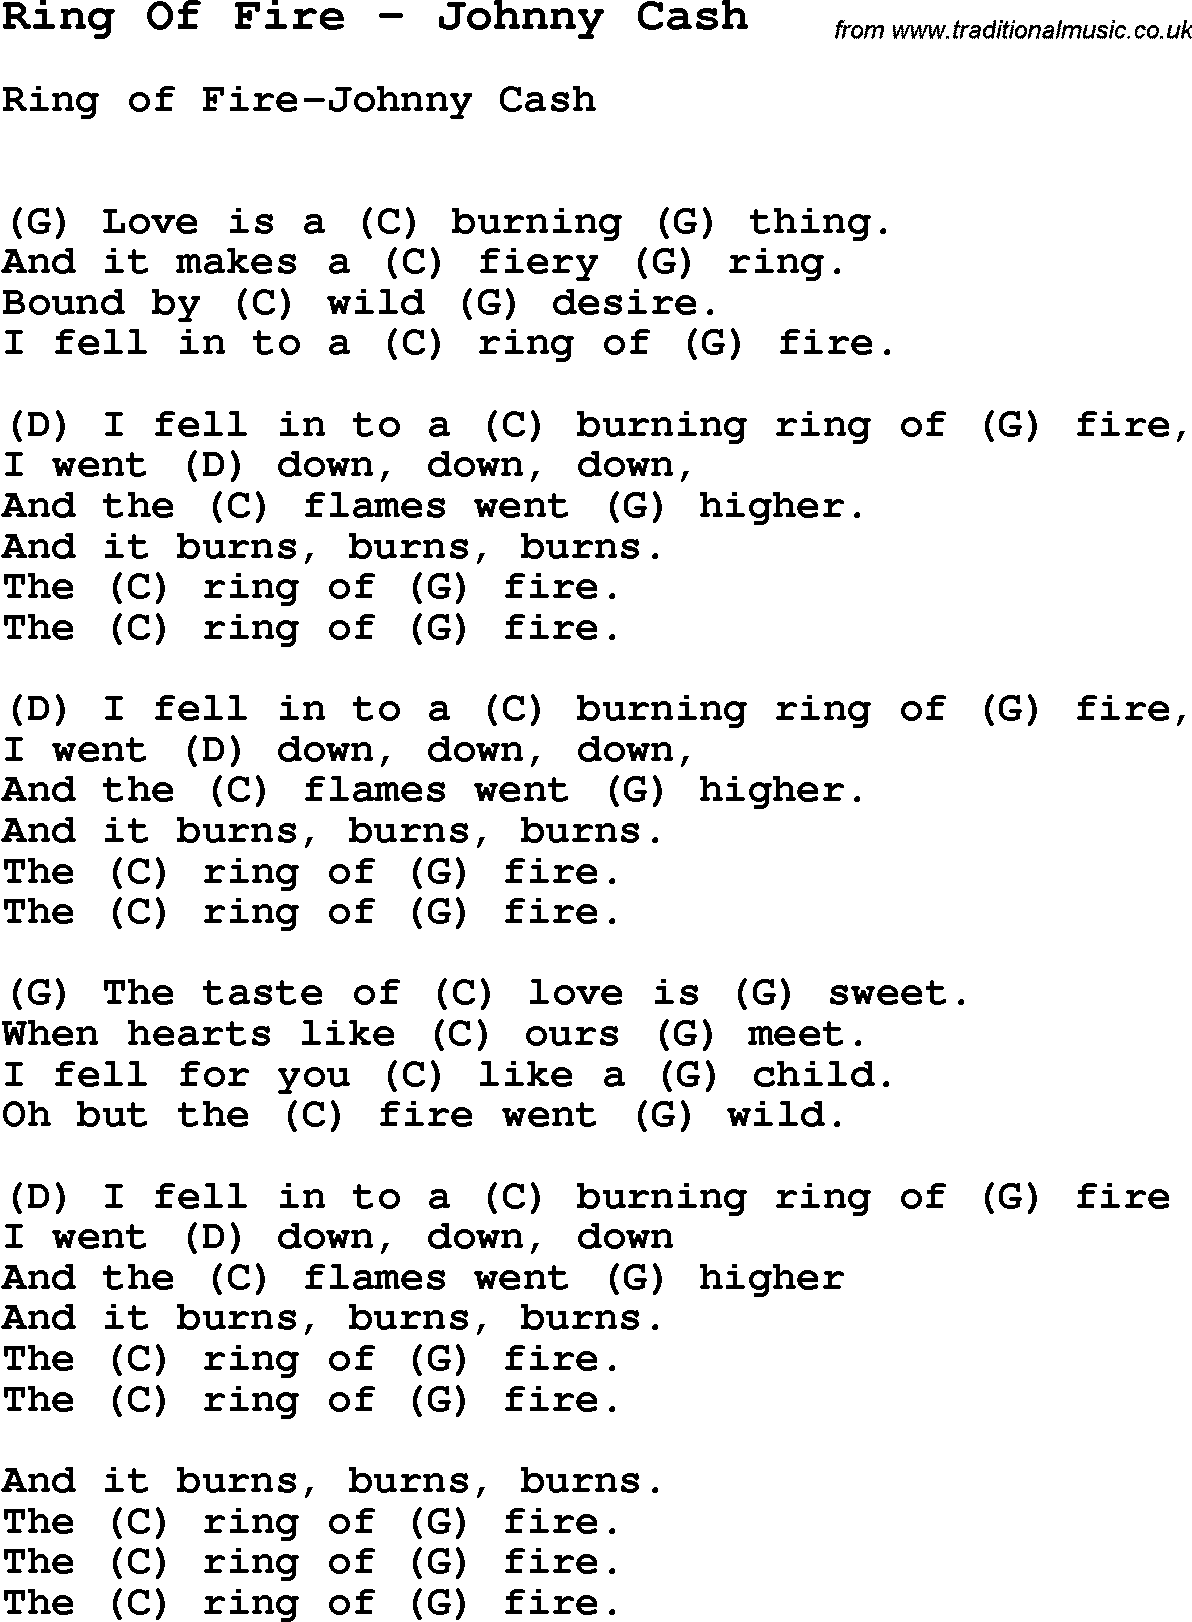 Song Ring Of Fire by Johnny Cash, with lyrics for vocal performance and accompaniment chords for Ukulele, Guitar Banjo etc.